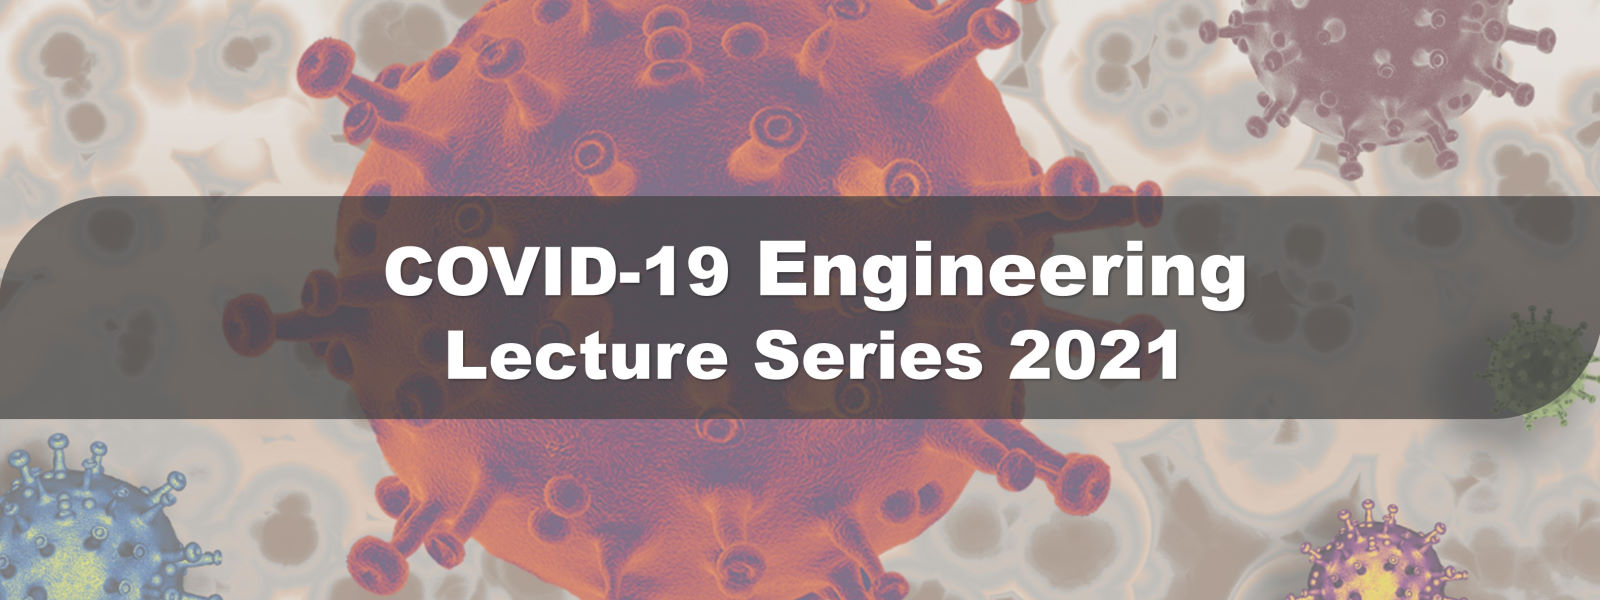 COVID-19 Engineering Lecture Series 2021